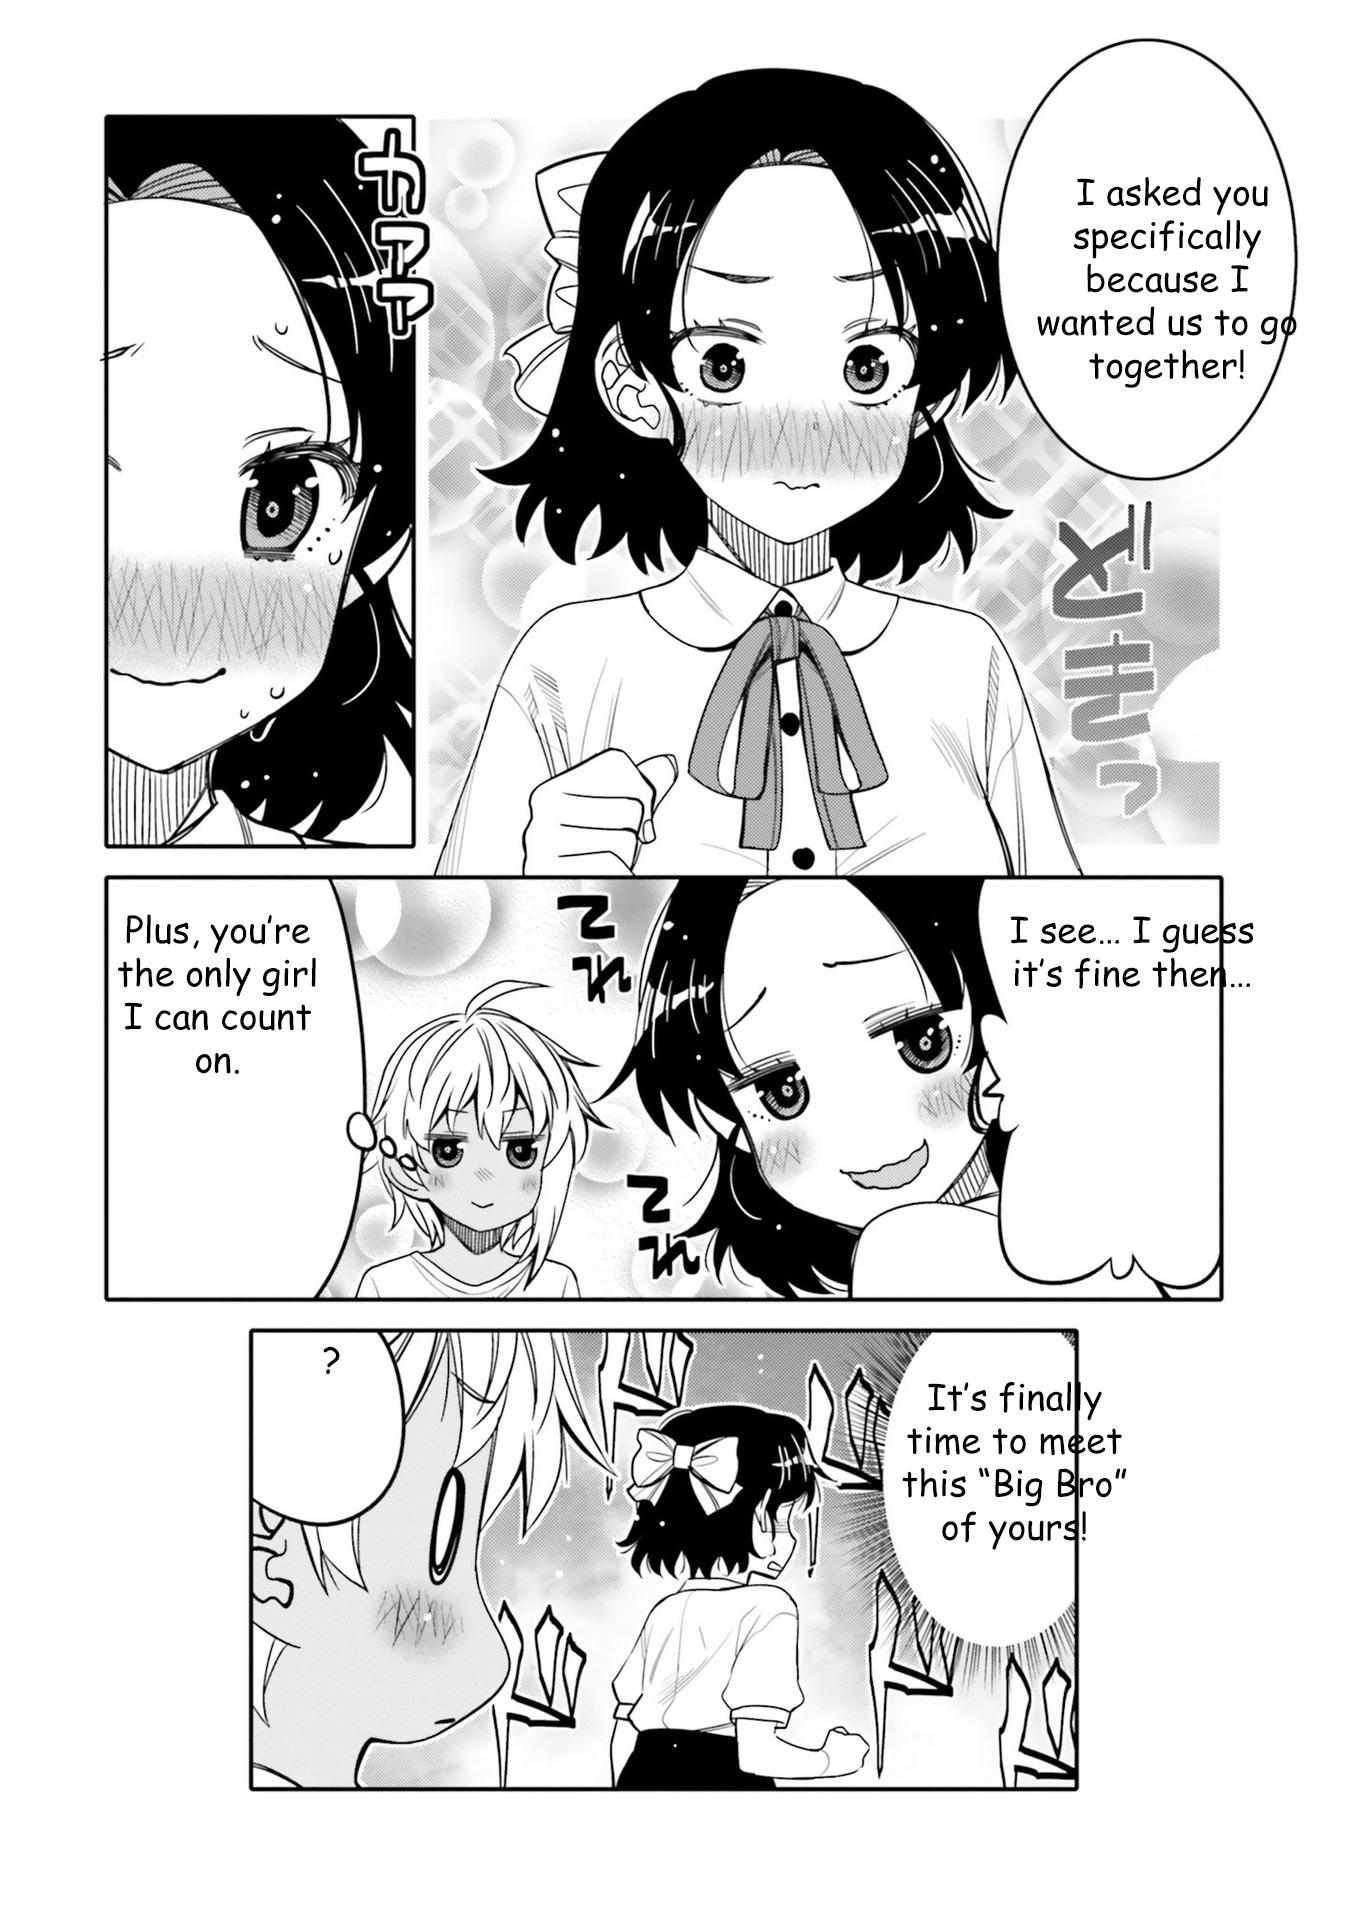 I Am Worried That My Childhood Friend Is Too Cute! chapter 21 page 17